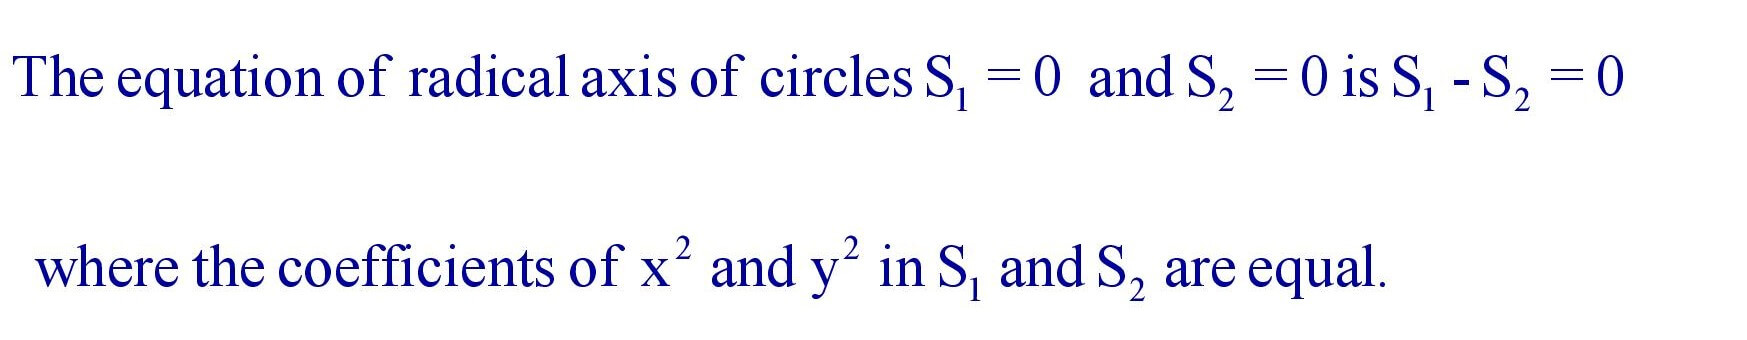 The equation of radical axis of circles